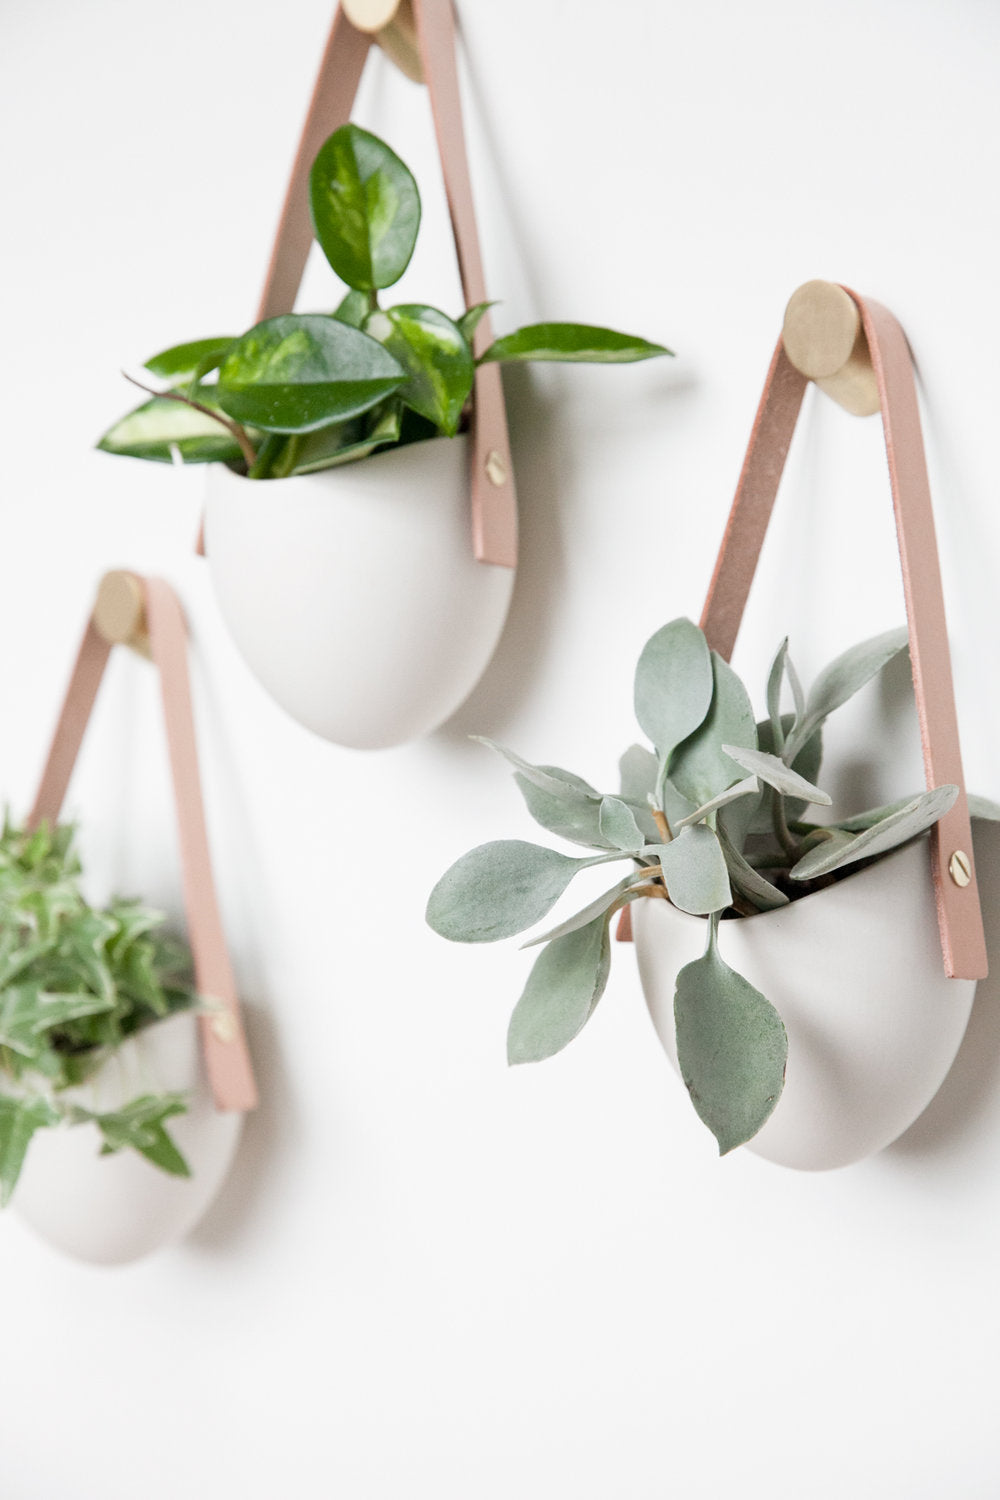 Spora porcelain wall hanging planters with natural leather strap